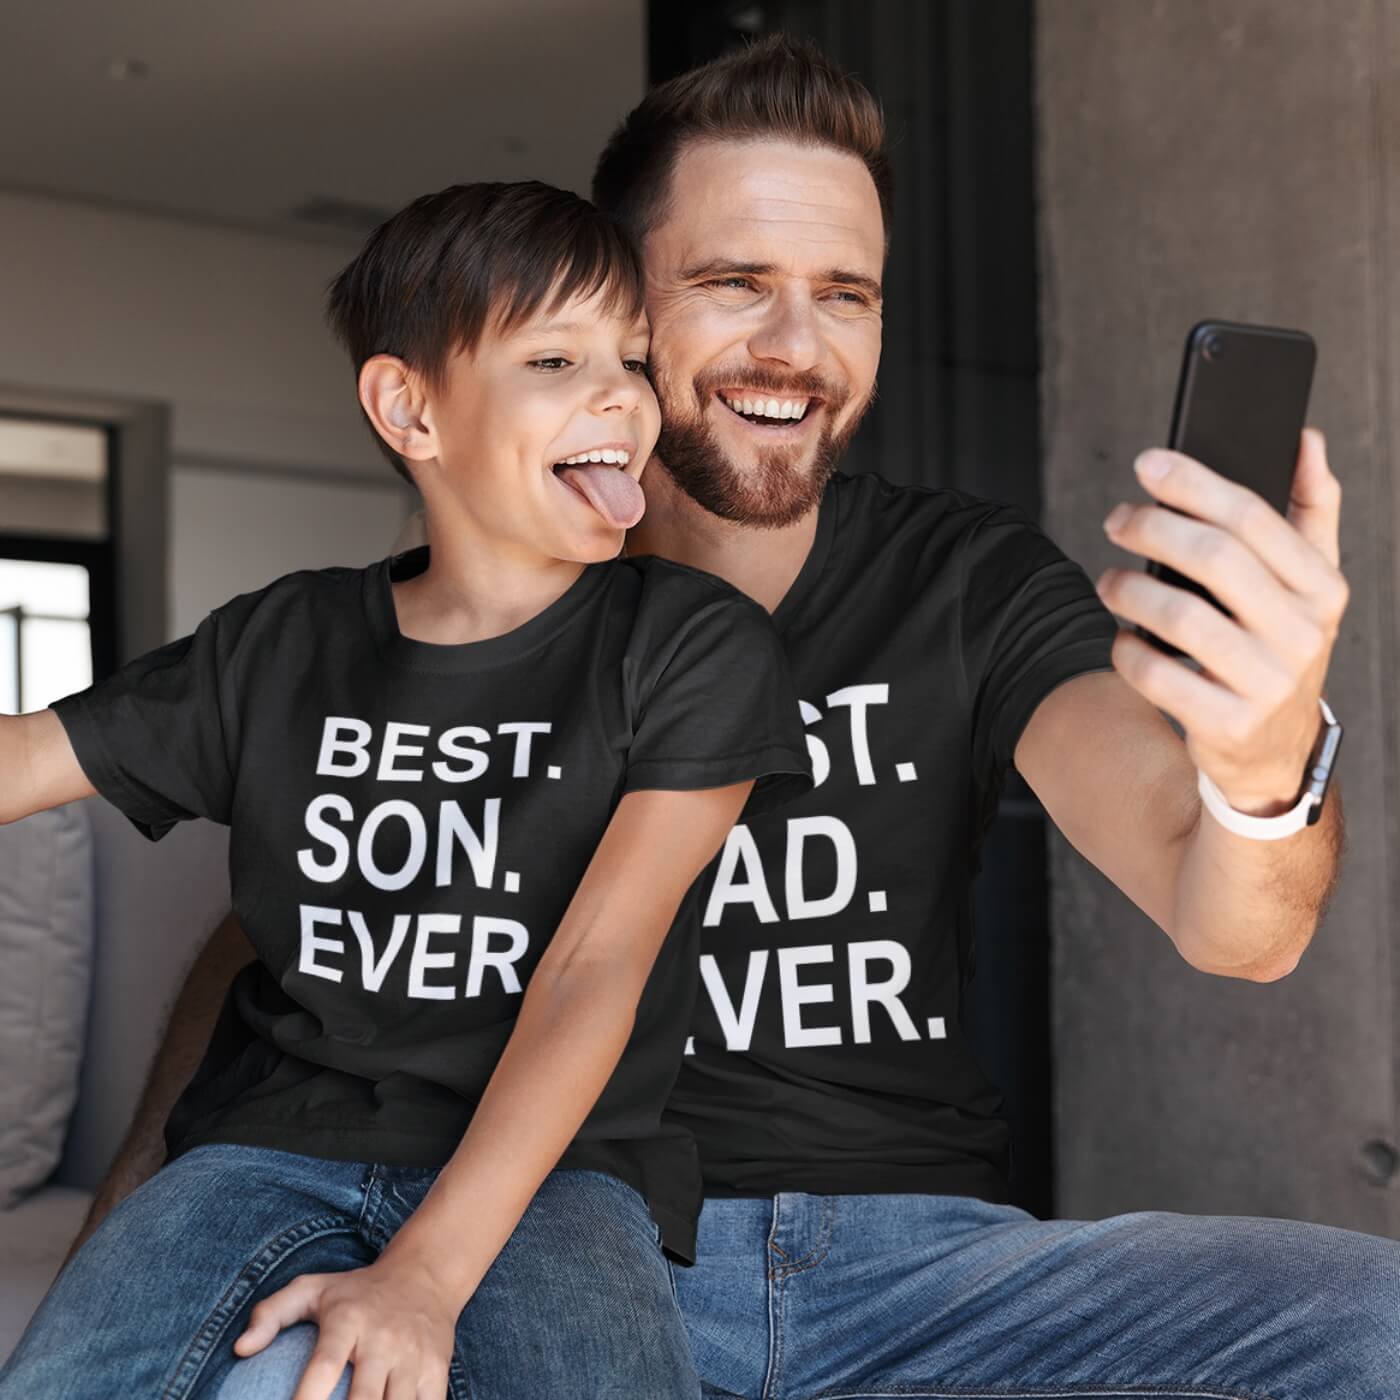 T shirts With Prints Best Dad and Son - 2 Pack Matching Family